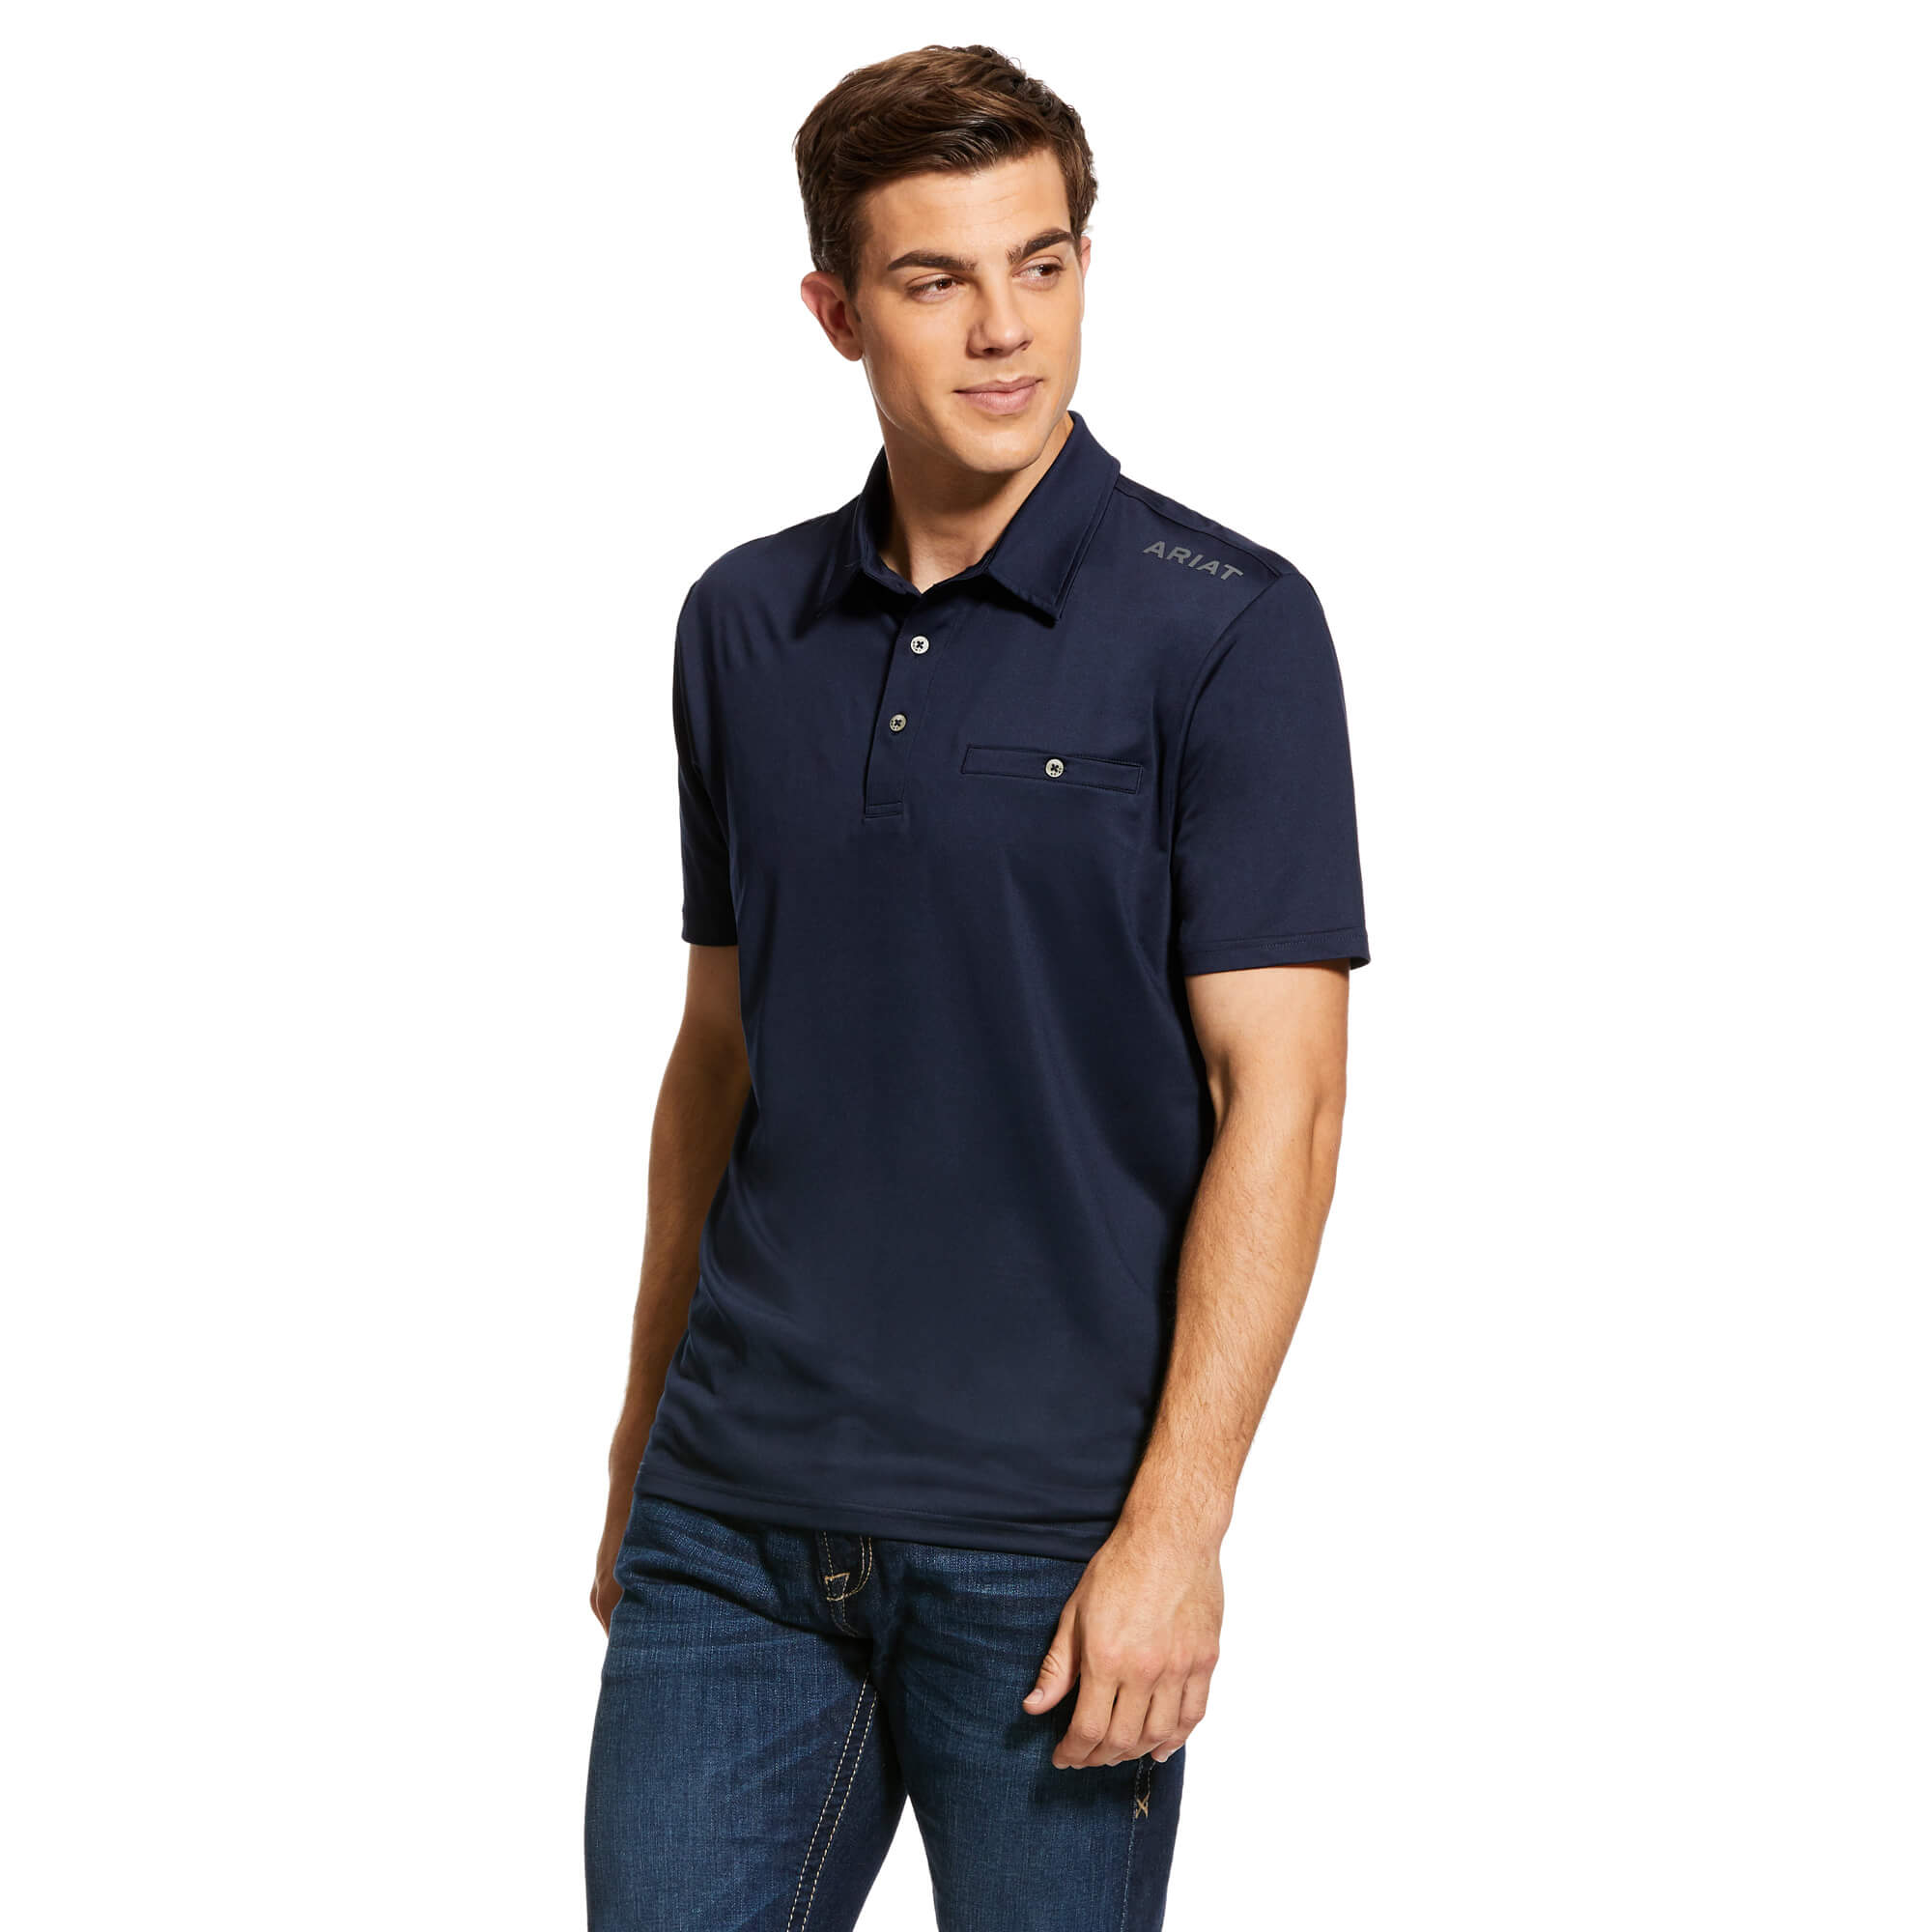 Herren Funktions Polo Shirt Norco